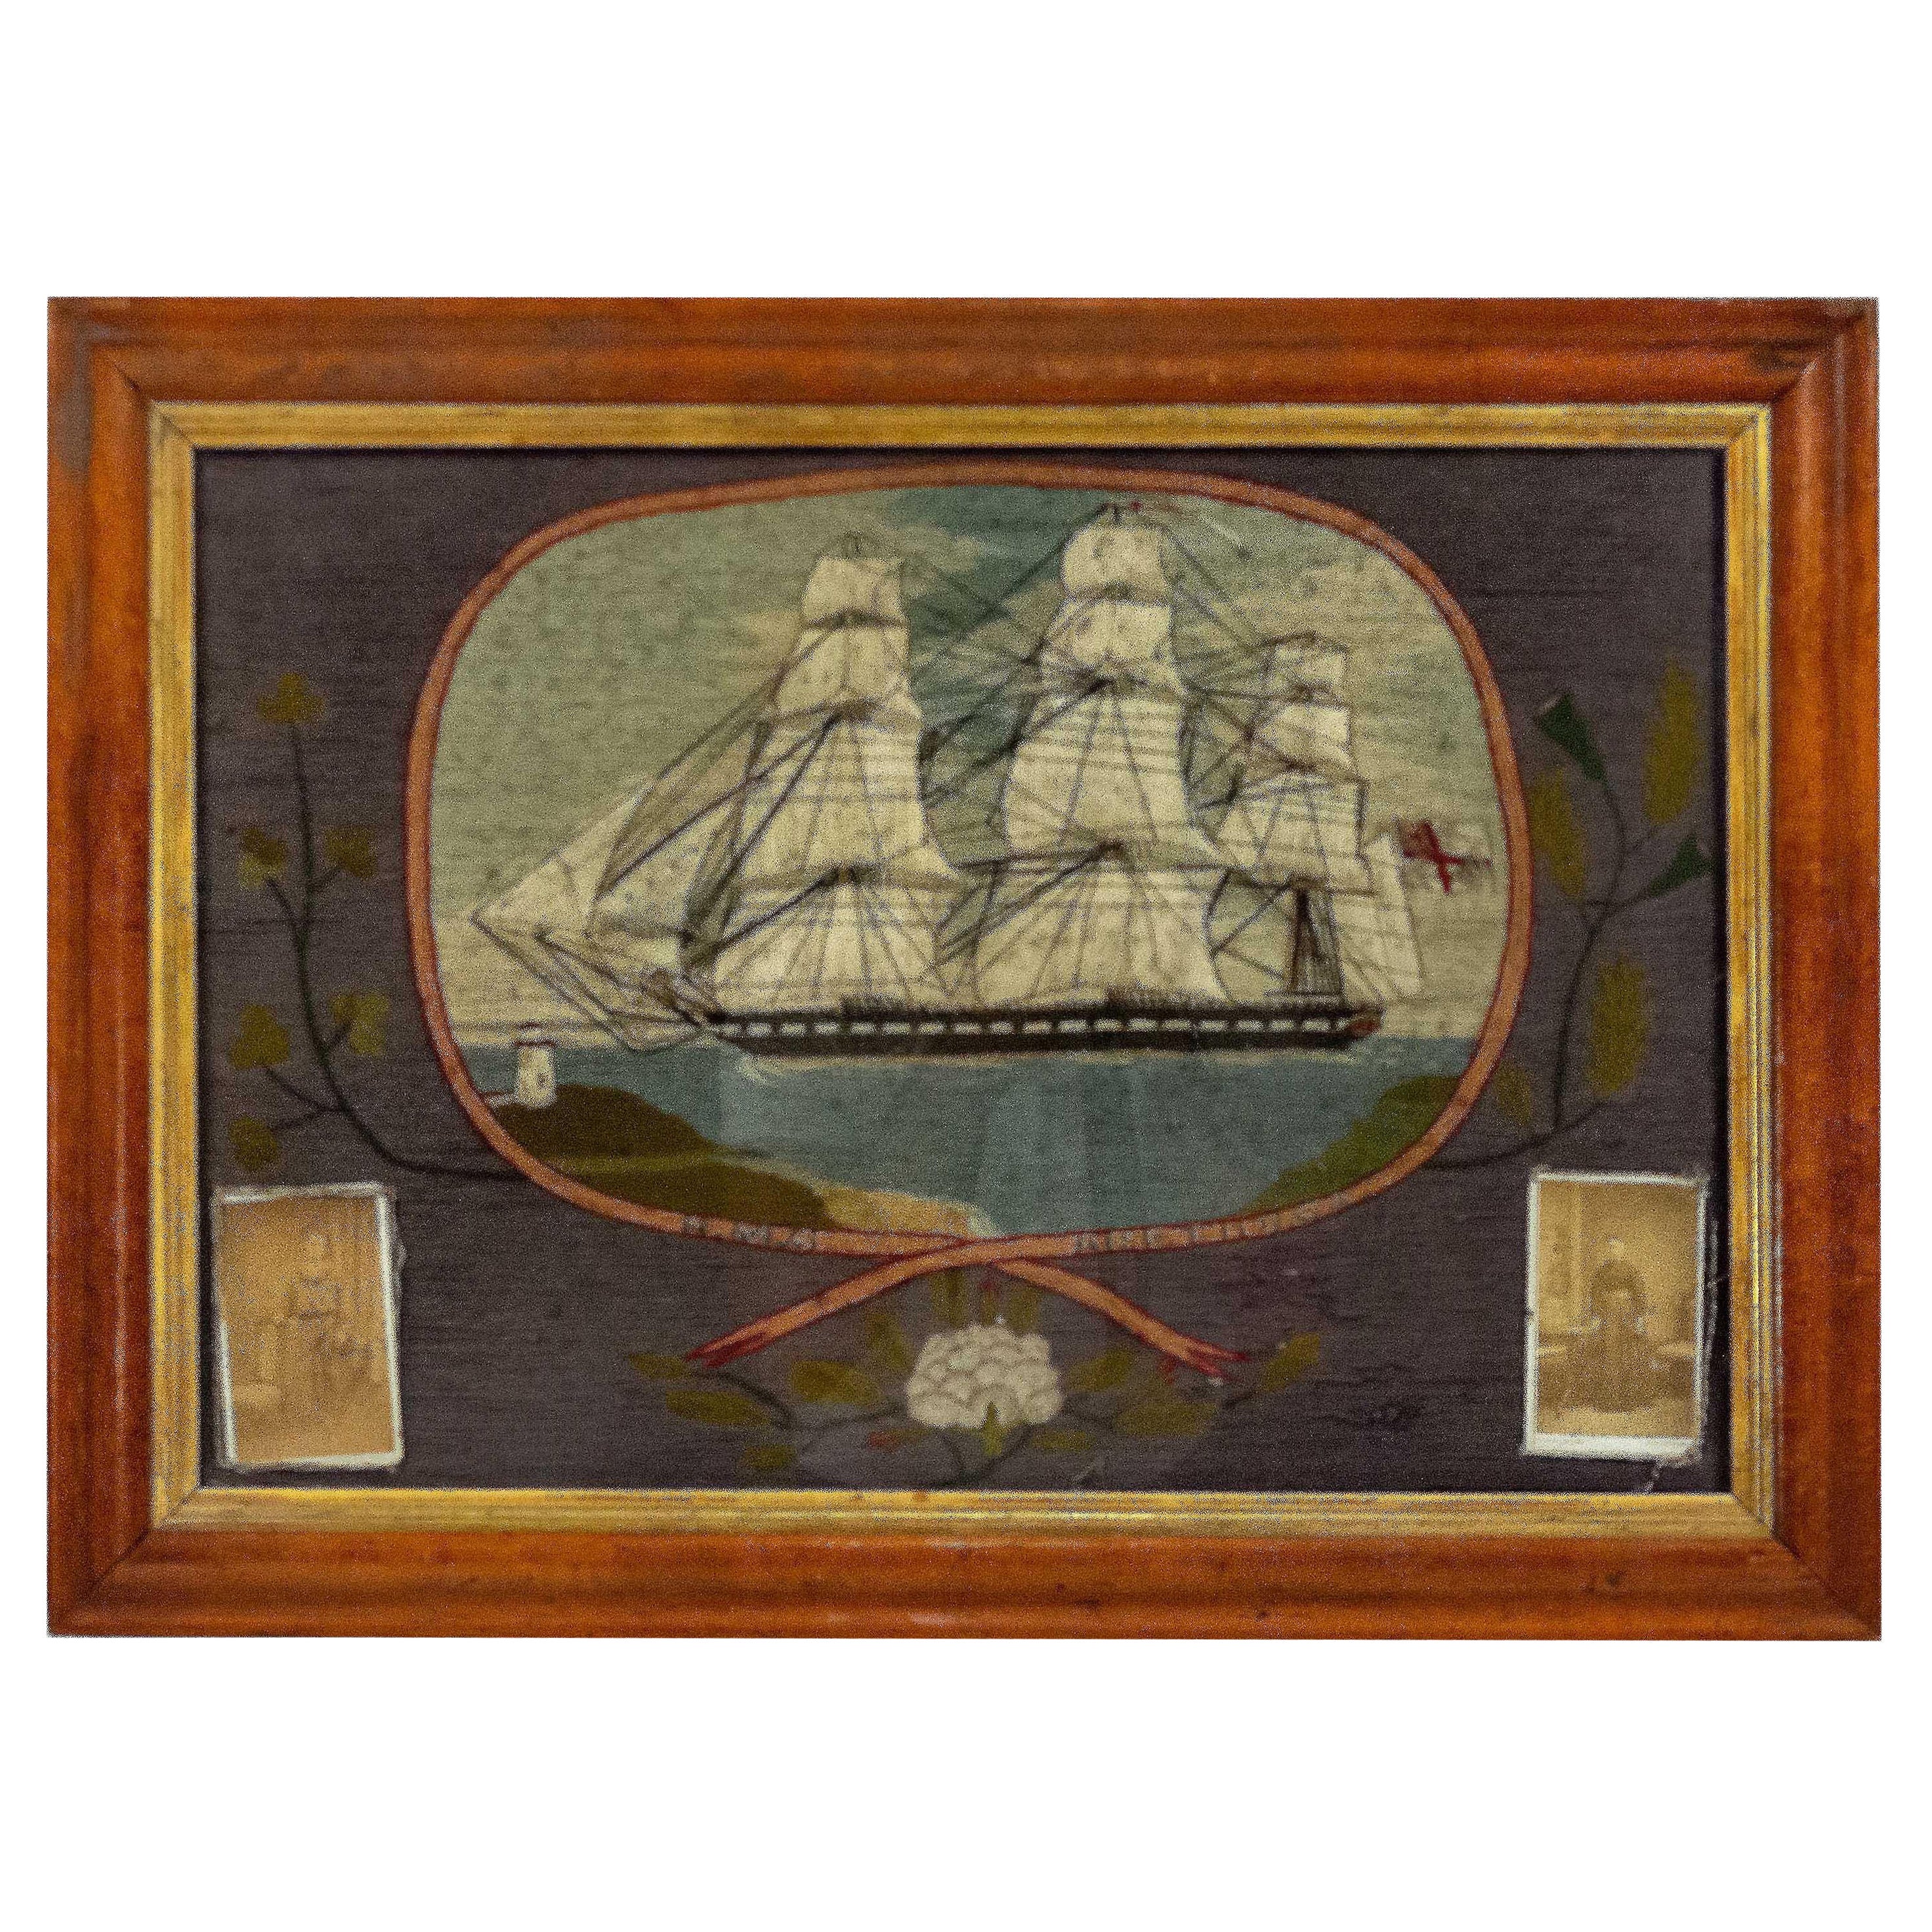 English Victorian Framed Memorial Naval Ship Embroidery